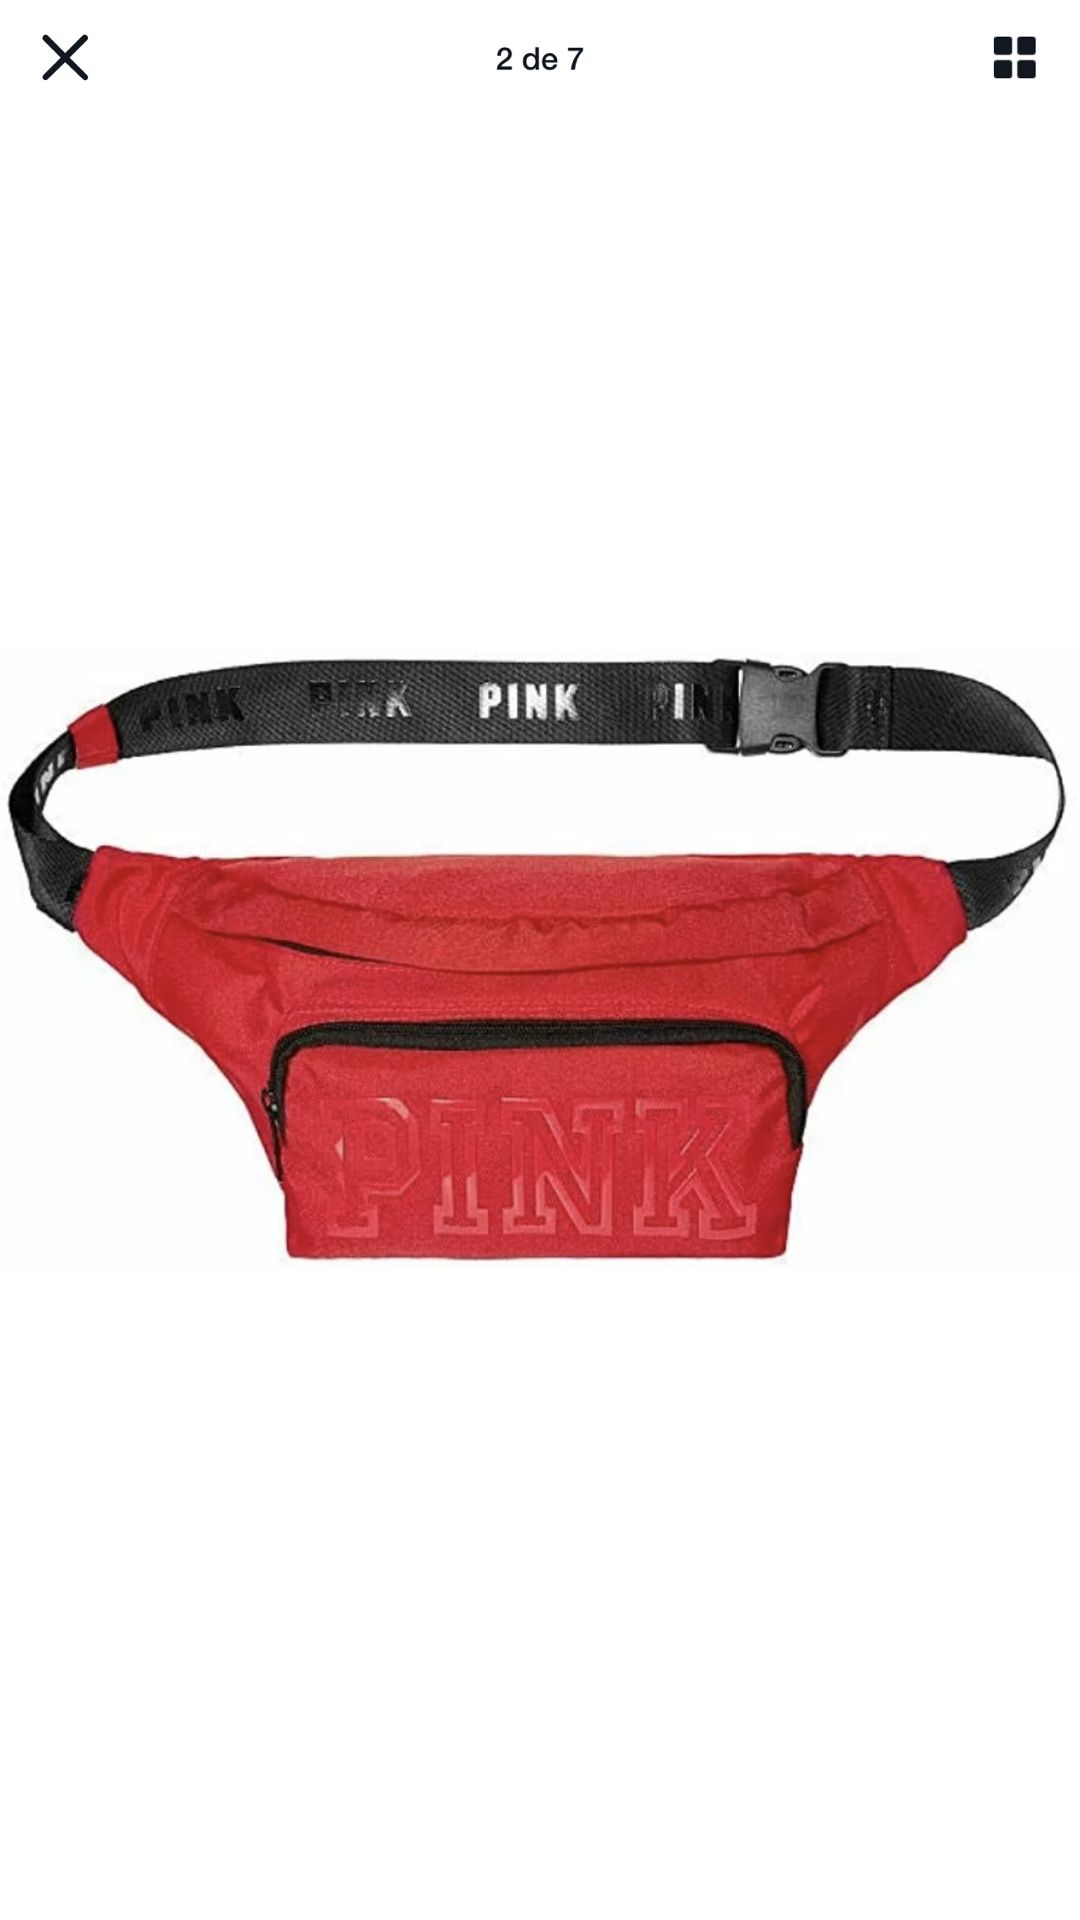 Victoria’s Secret PINK Oversized Belt Bag Waist Purse Funny Pack NEON CANDY CORAL + Free Shipping